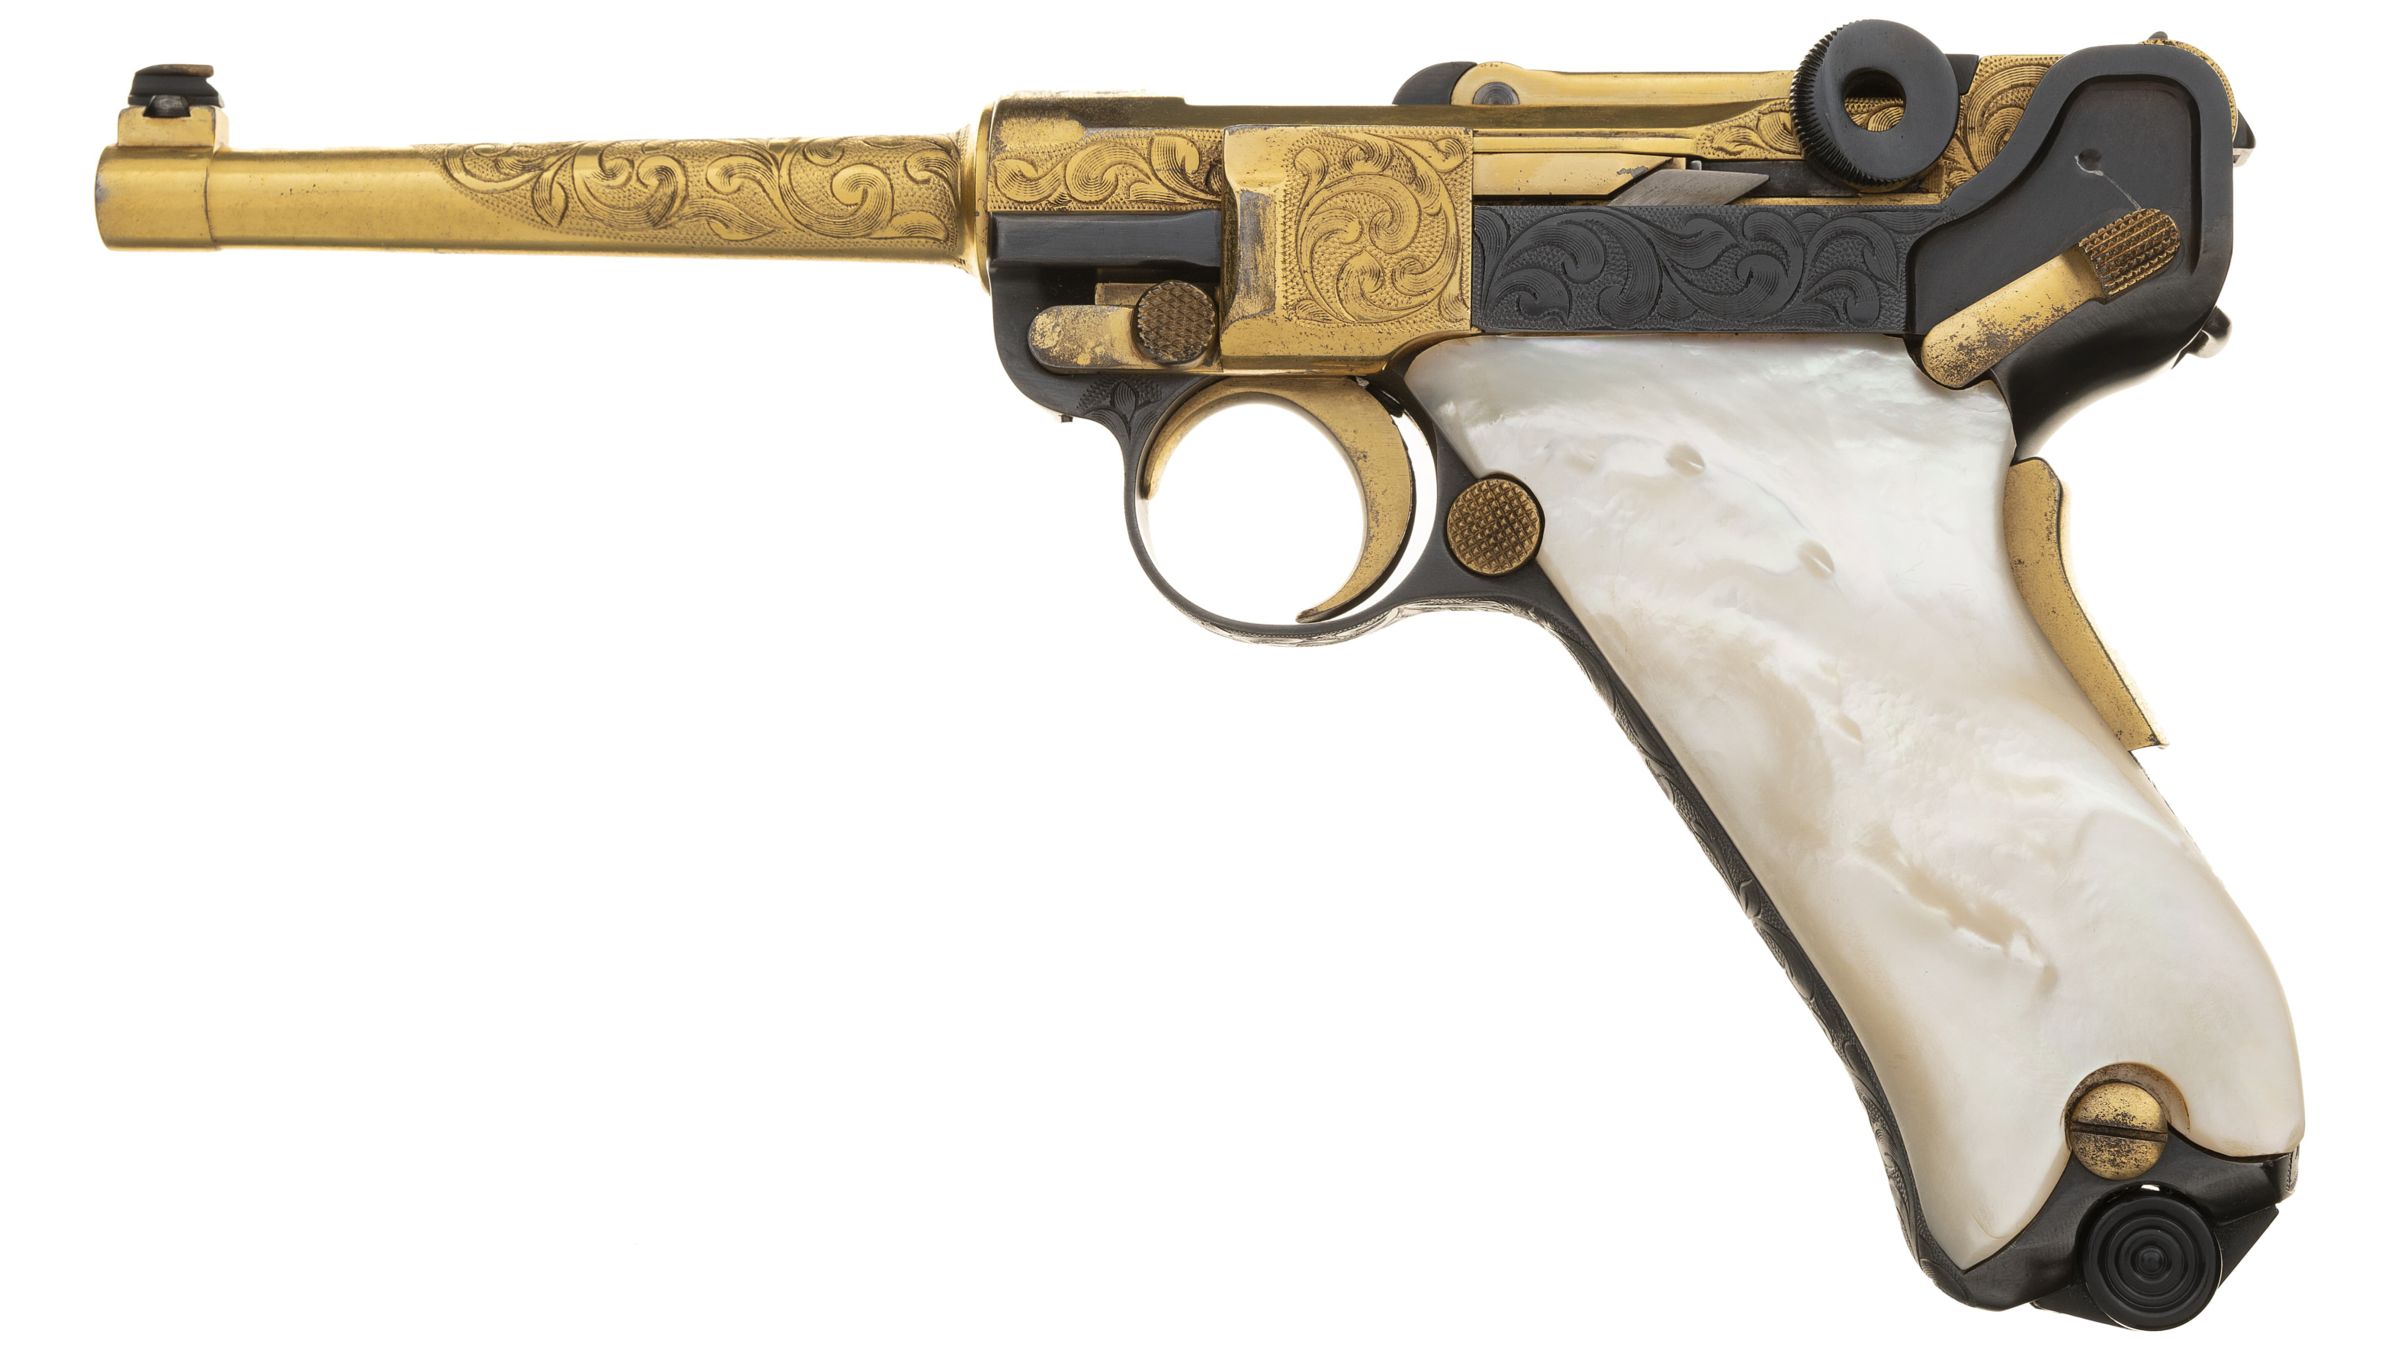 20-facts-about-luger-pistol